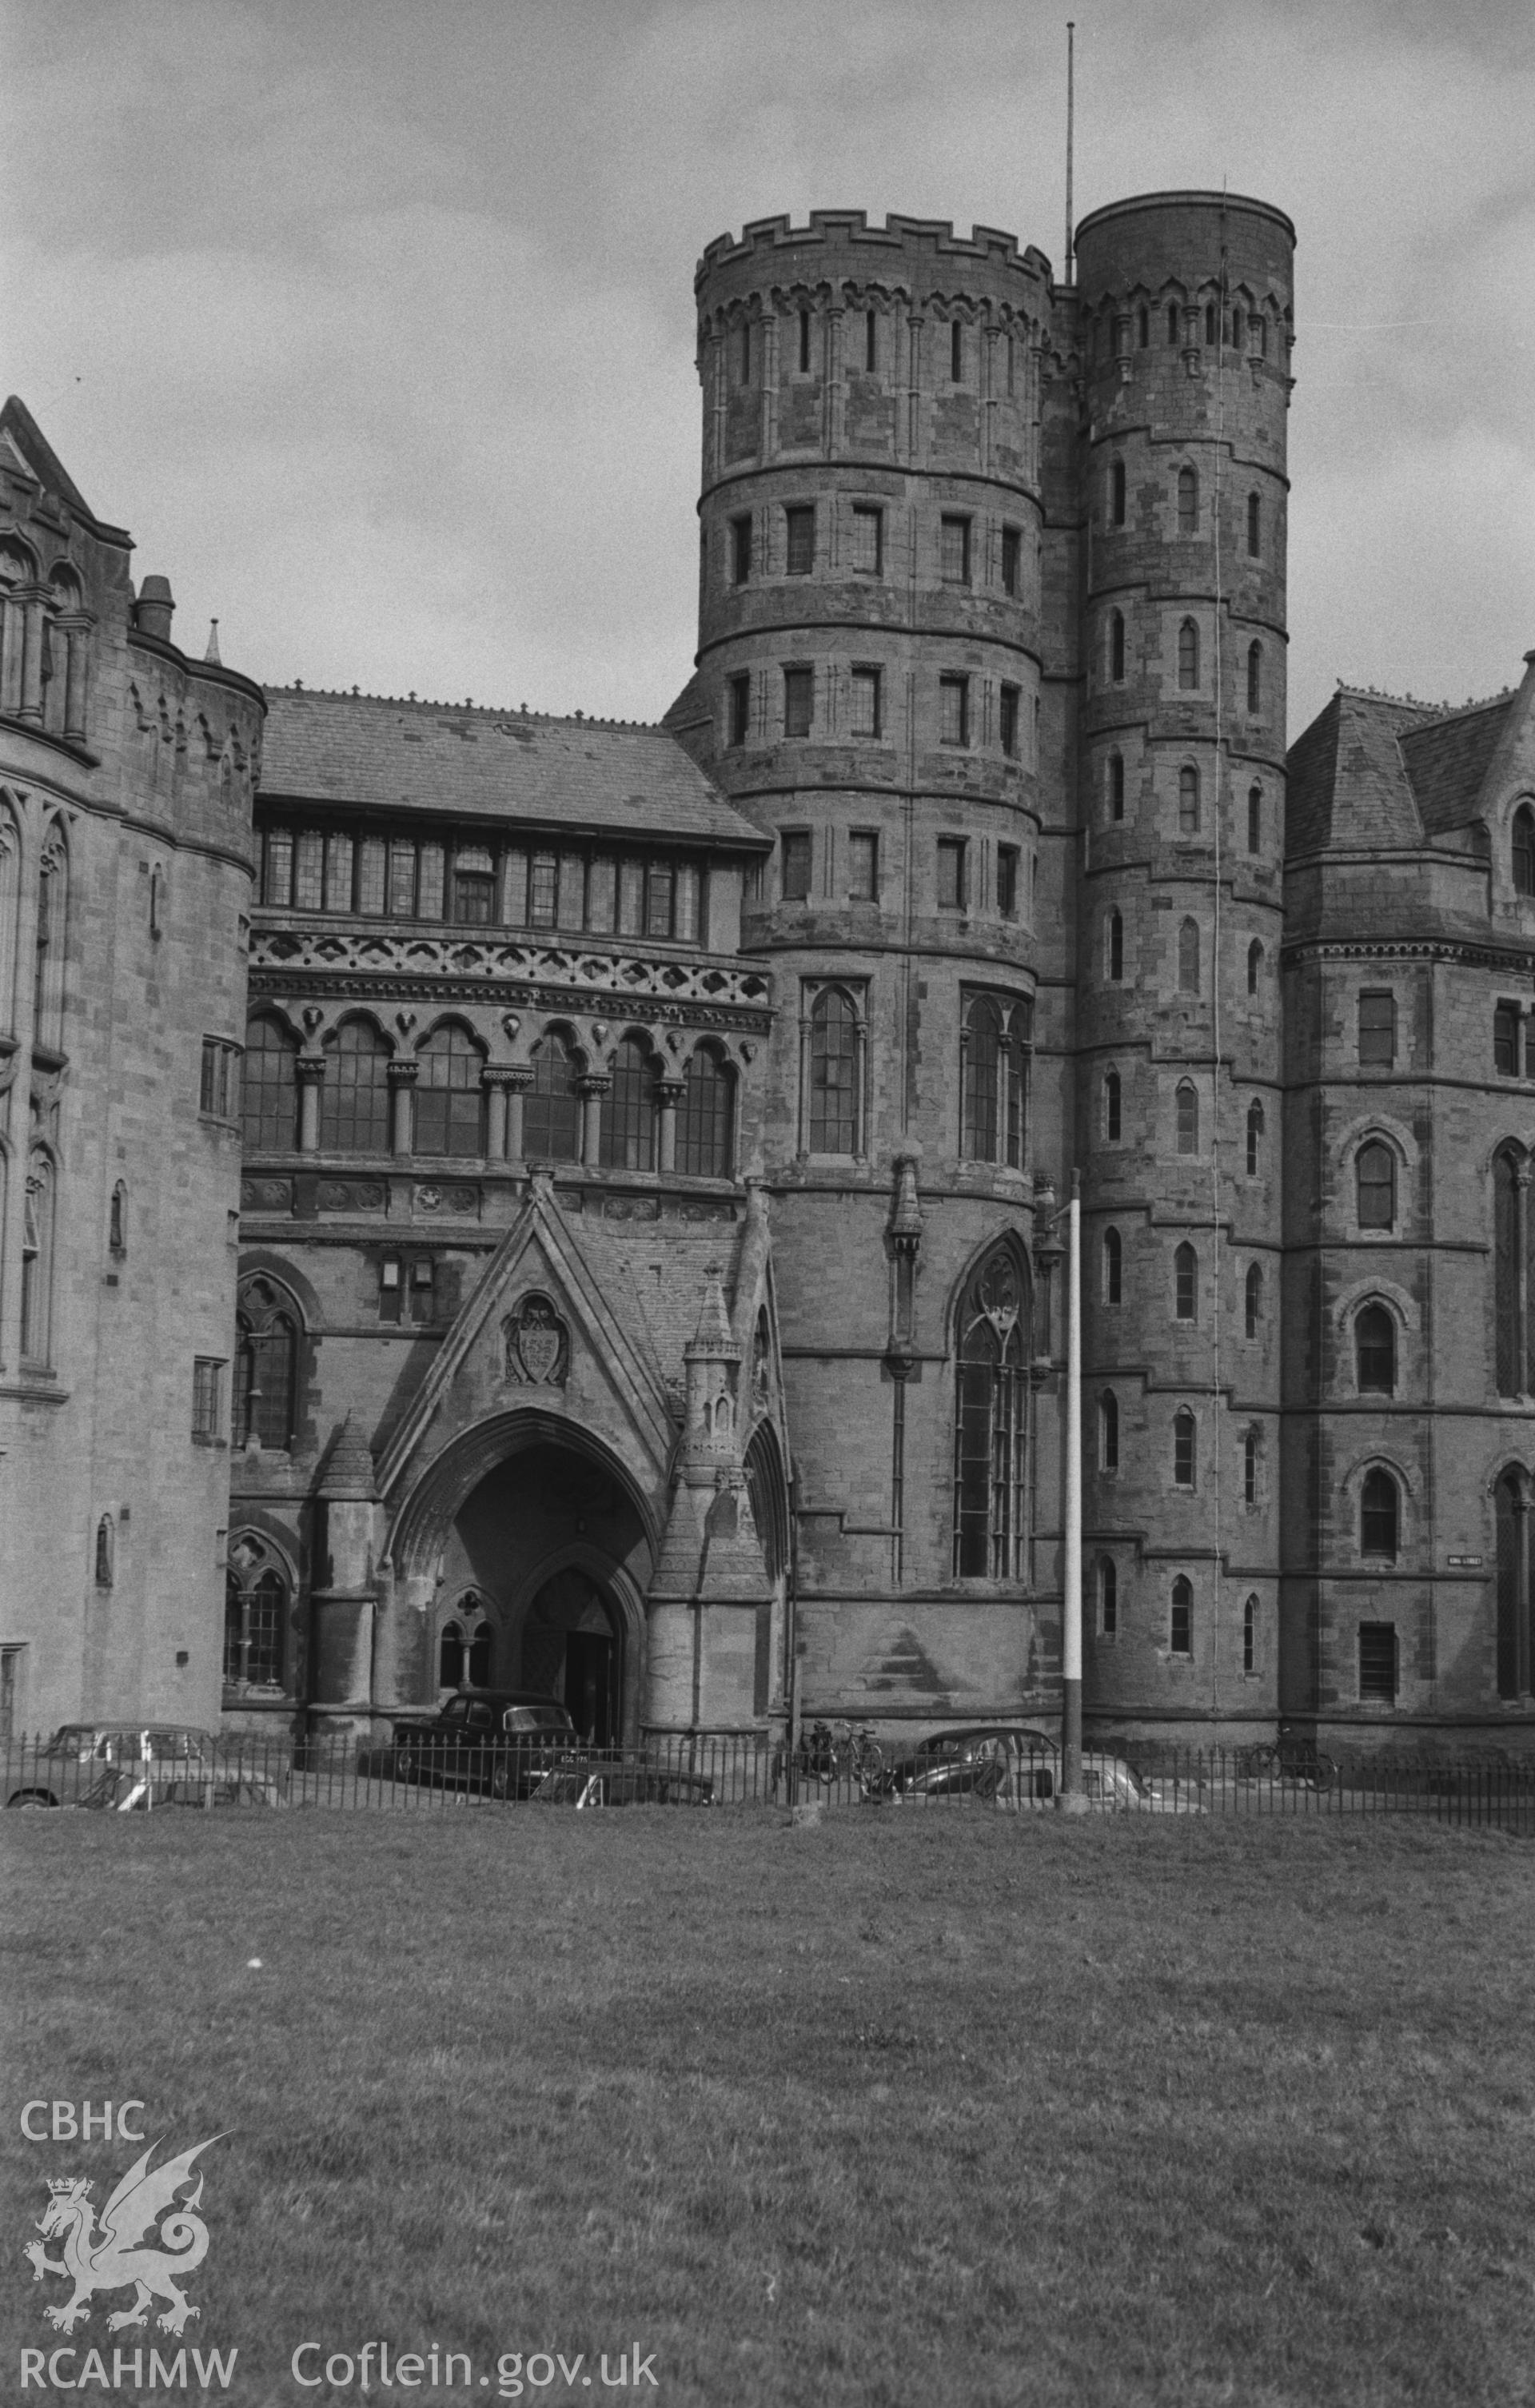 Black and White photograph showing Old College main entrance, Aberystwyth, viewed from churchyard. Photographed by Arthur Chater in March 1961 from Grid Reference SN 5807 8164, looking north.